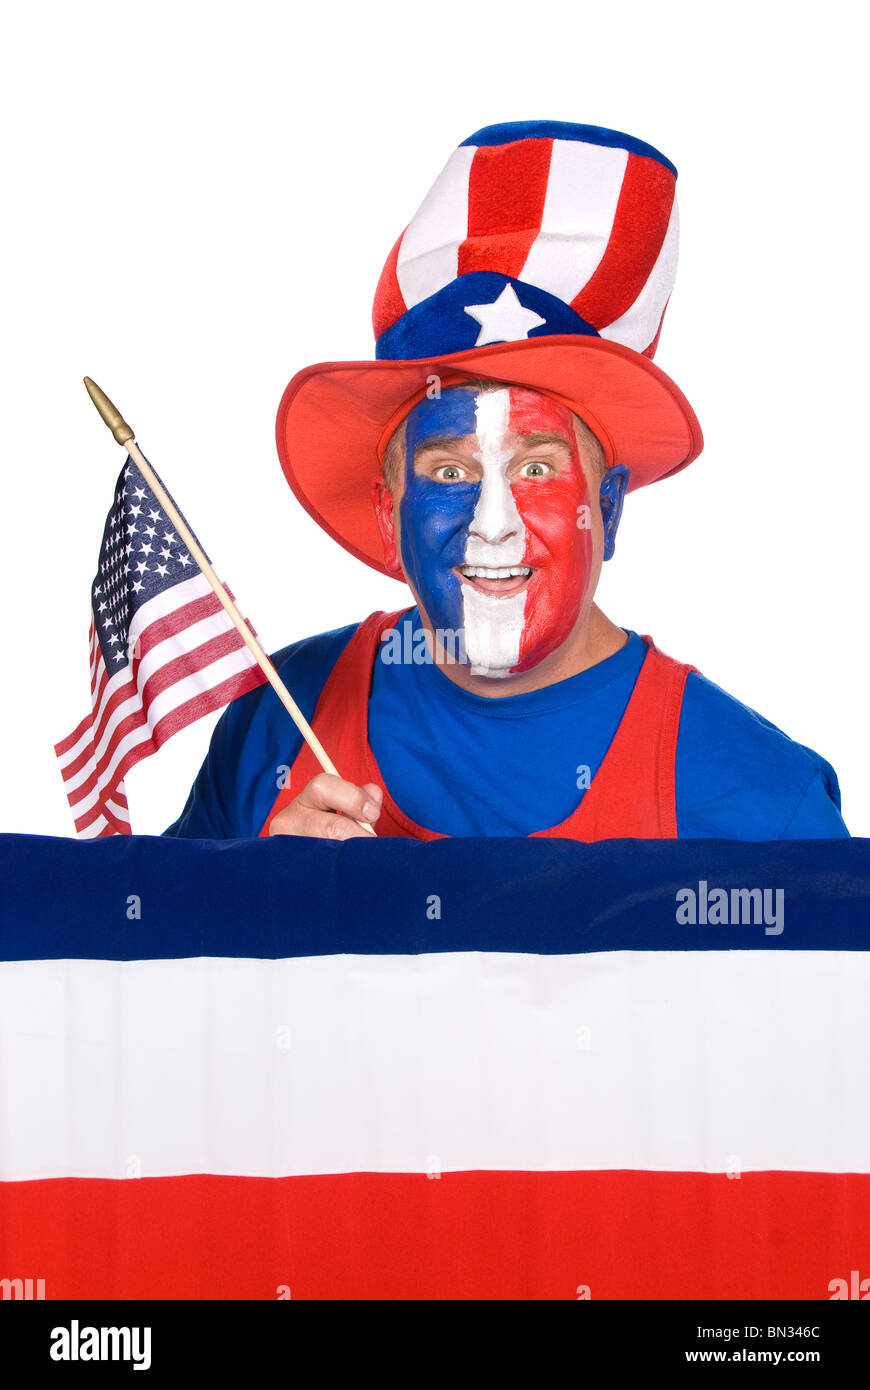 A patriotic man with red, white and blue face paint holds up an American flag. Stock Photo